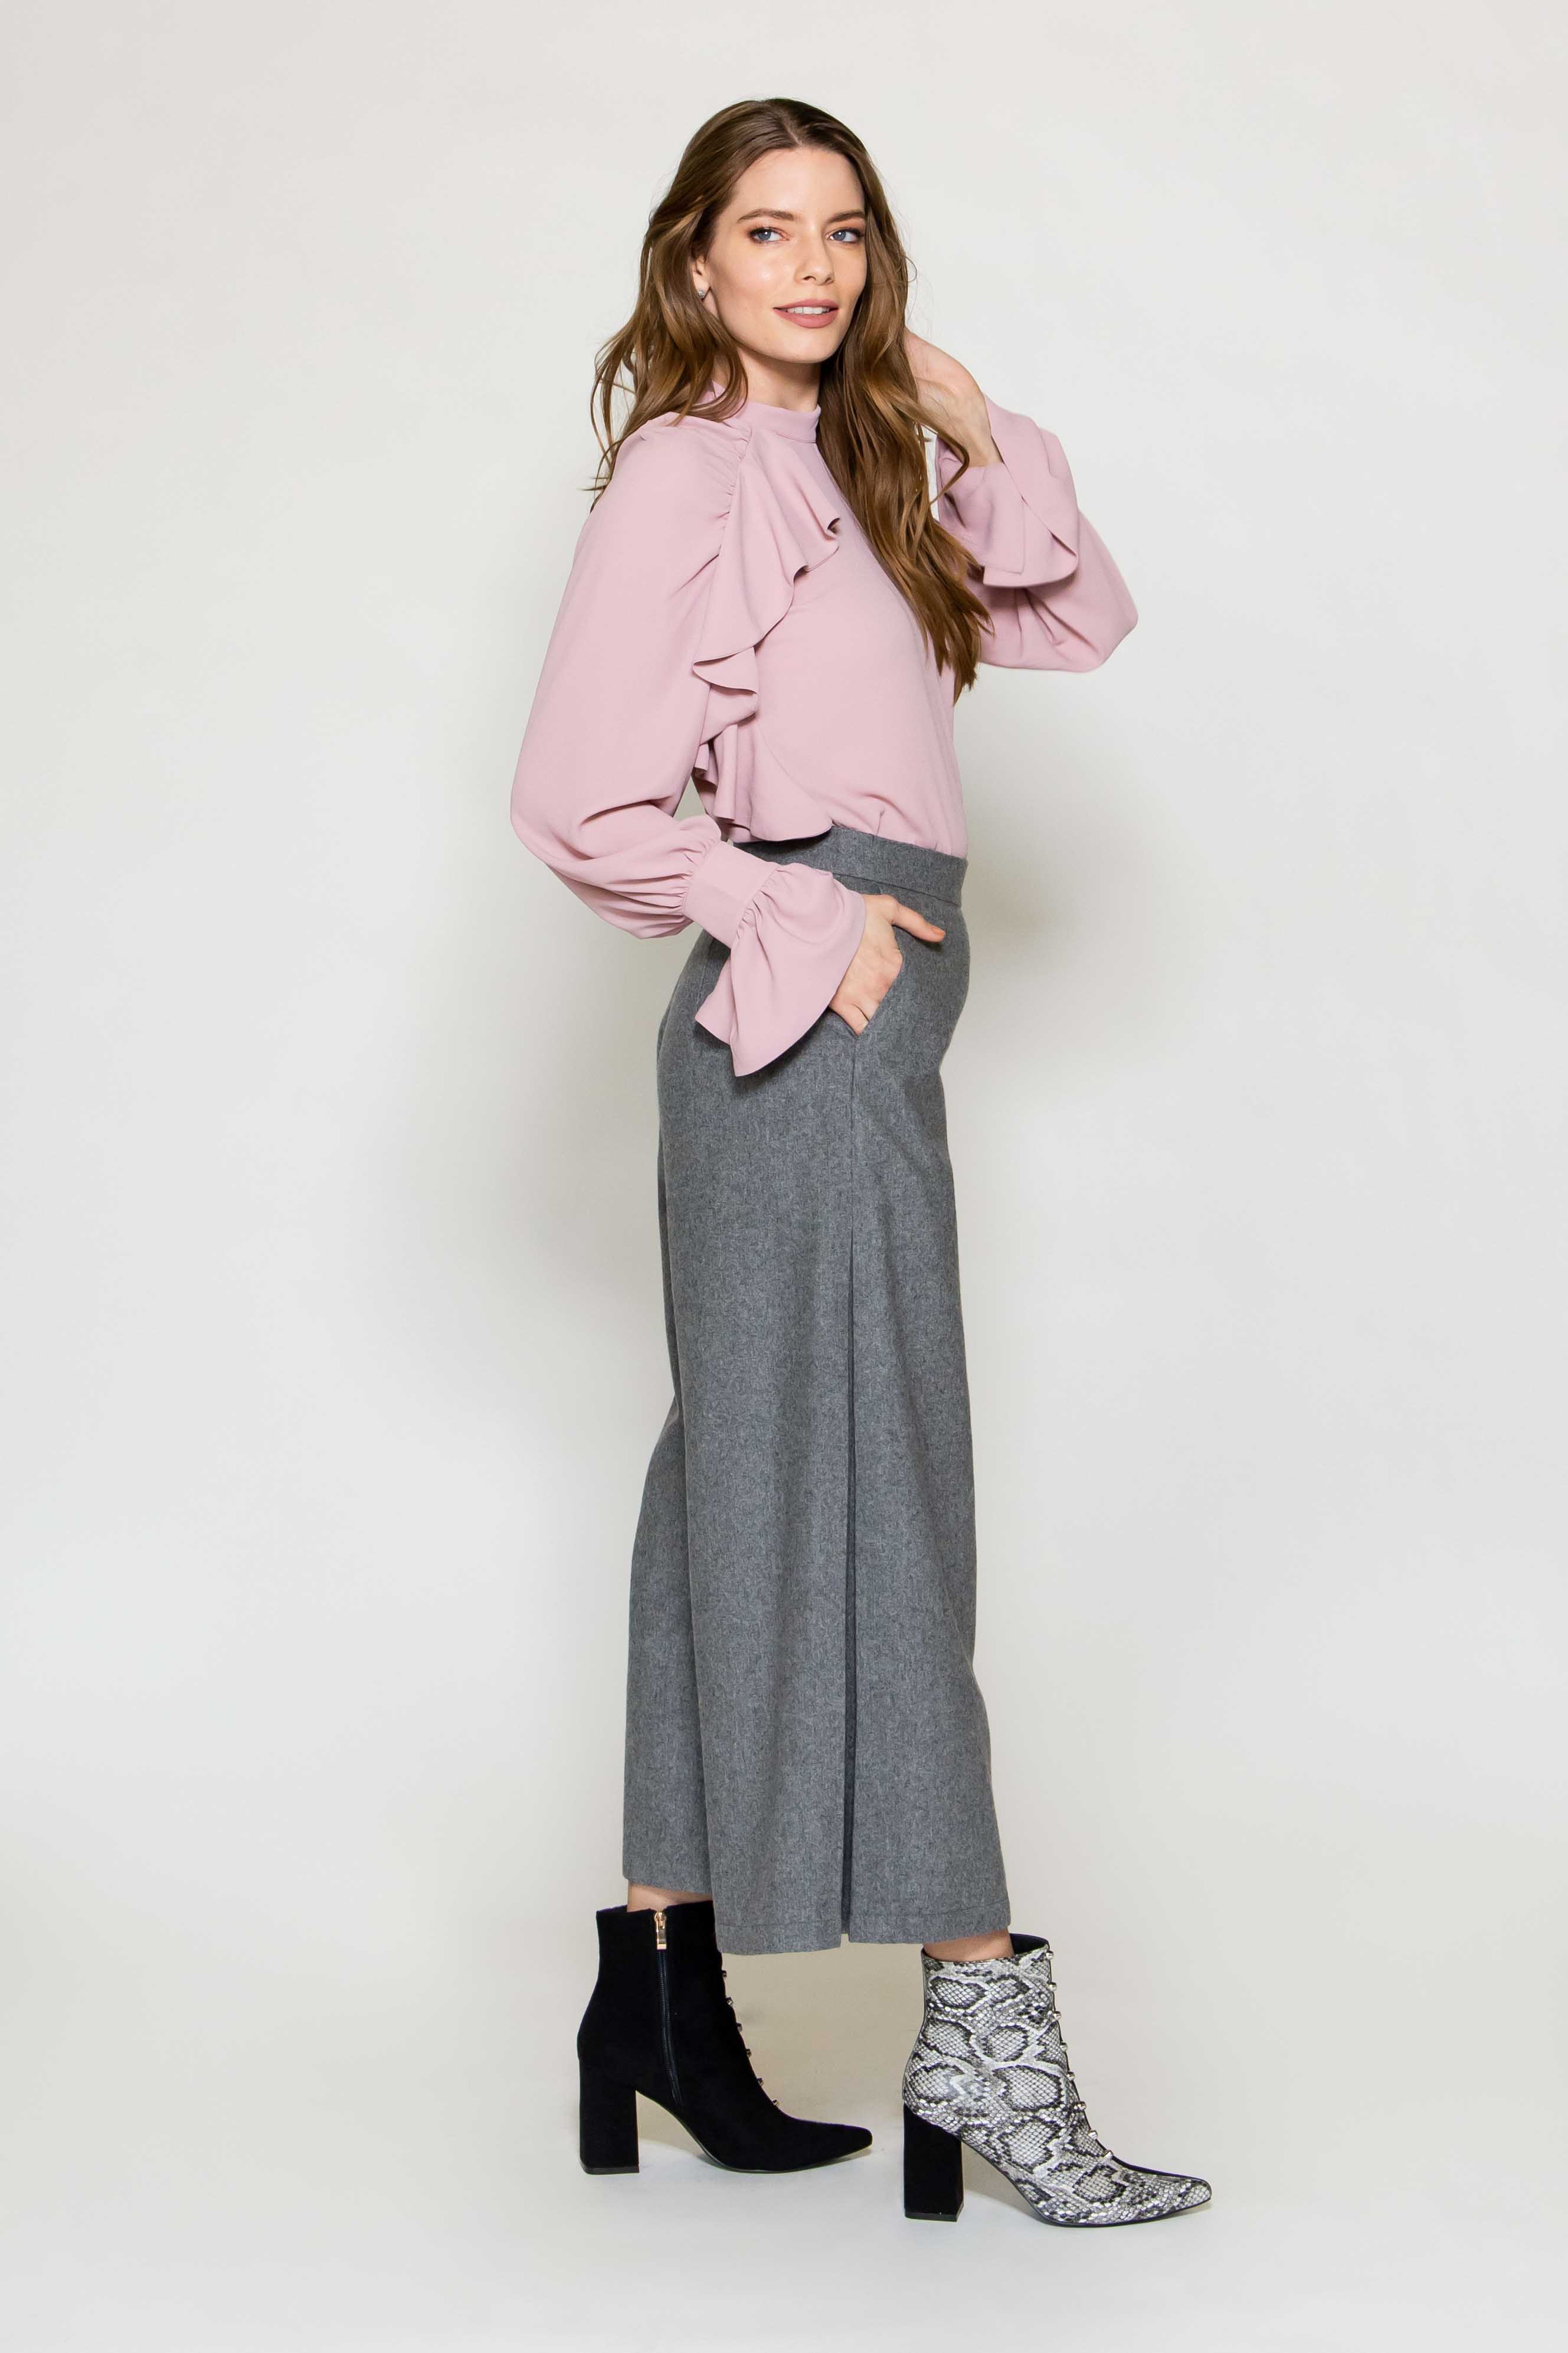 Marisé Eco . Couture Milan Grey Crepe Pocket Wool Pants with Anna Pink Ruffled Blouse- Italian Women's Clothing